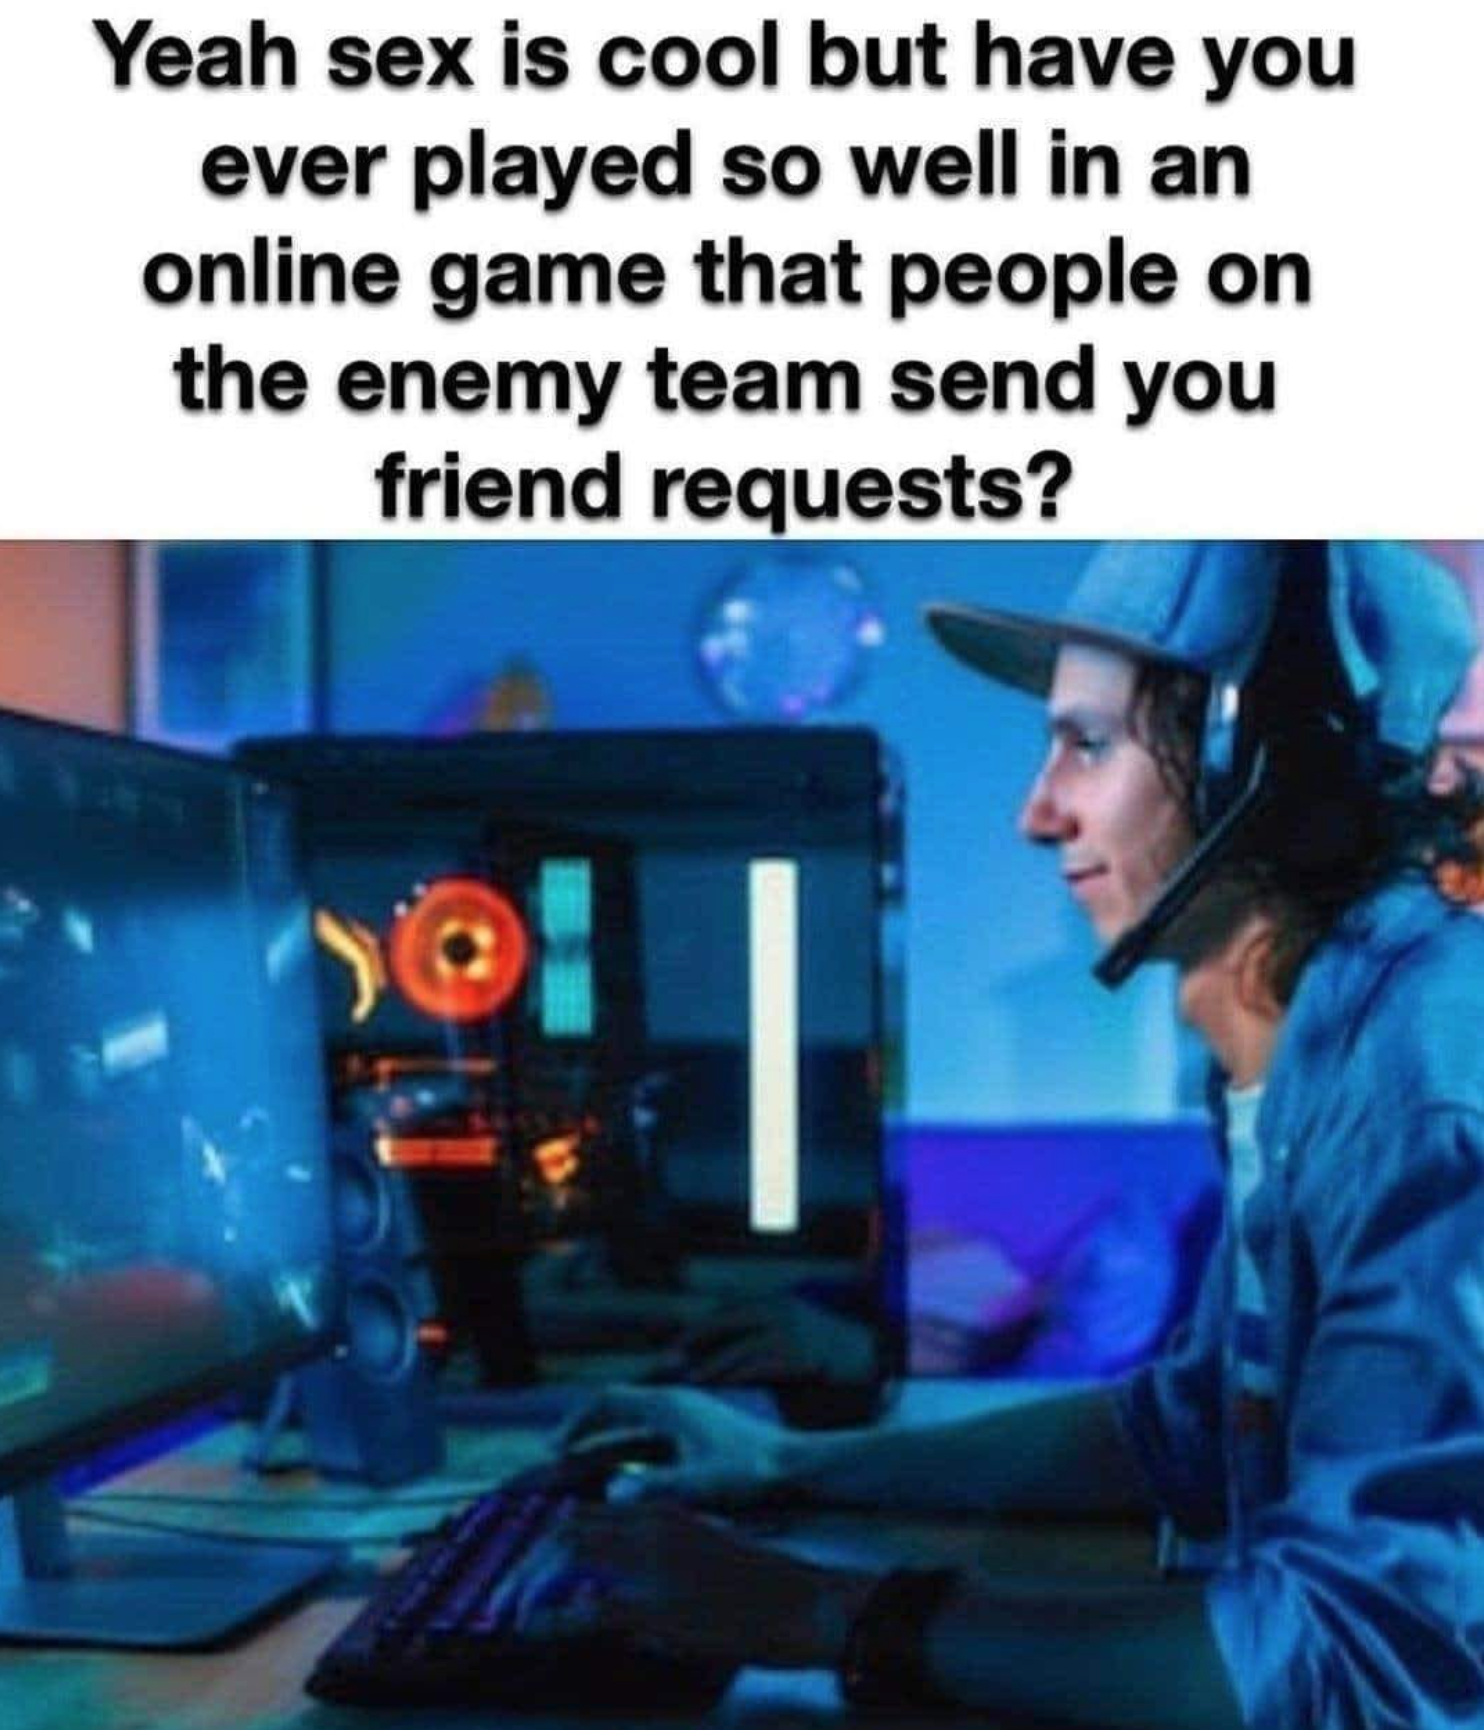 gaming memes and pics - gaming setup ideas - Yeah sex is cool but have you ever played so well in an online game that people on the enemy team send you friend requests?